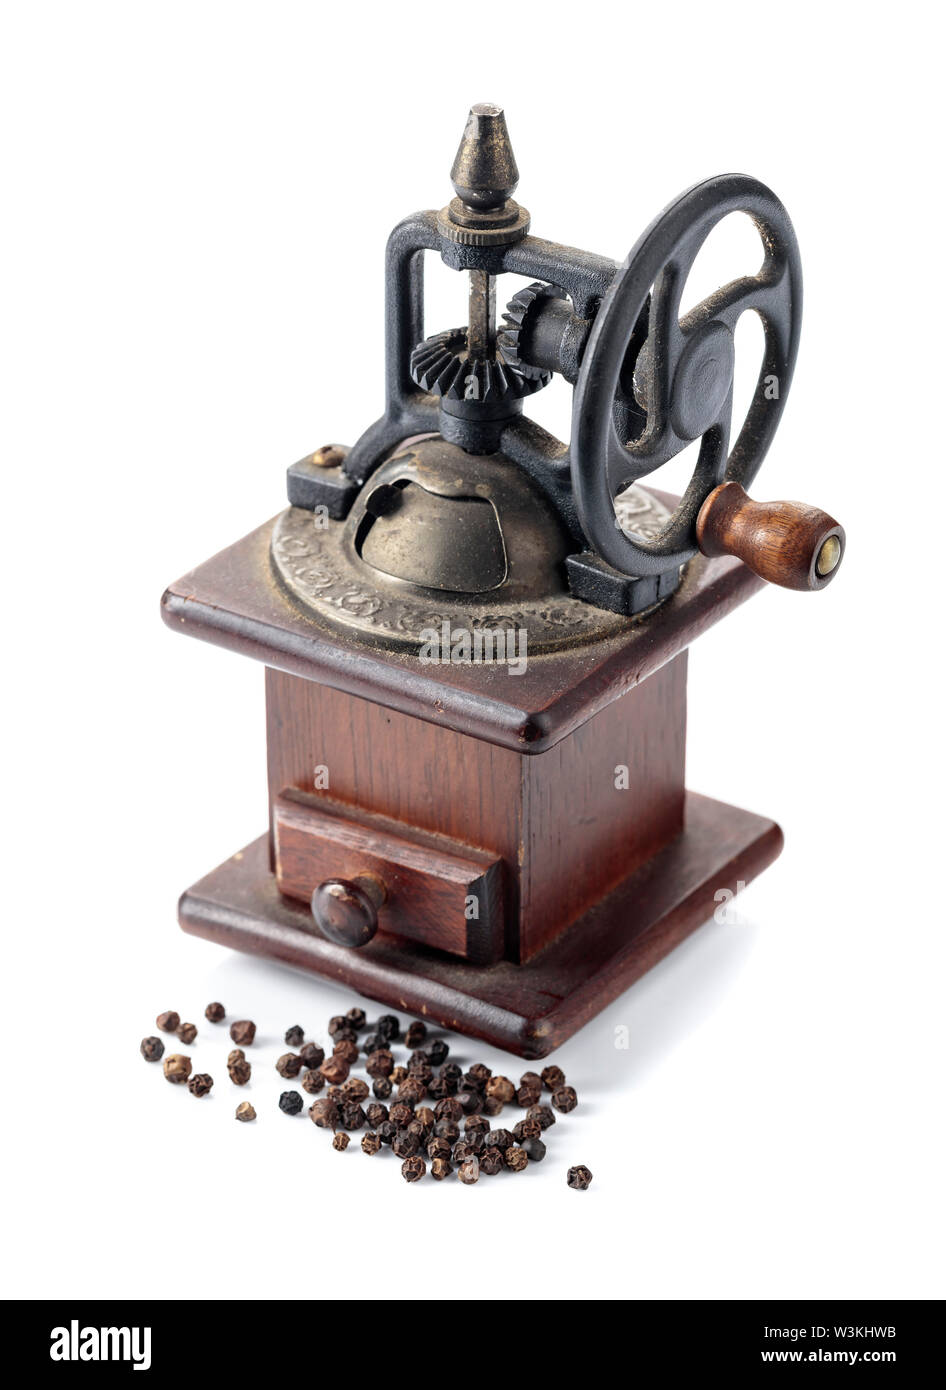 https://c8.alamy.com/comp/W3KHWB/vintage-rusty-wooden-black-pepper-grinder-or-mill-with-a-mechanical-handle-gear-isolated-on-a-white-background-W3KHWB.jpg